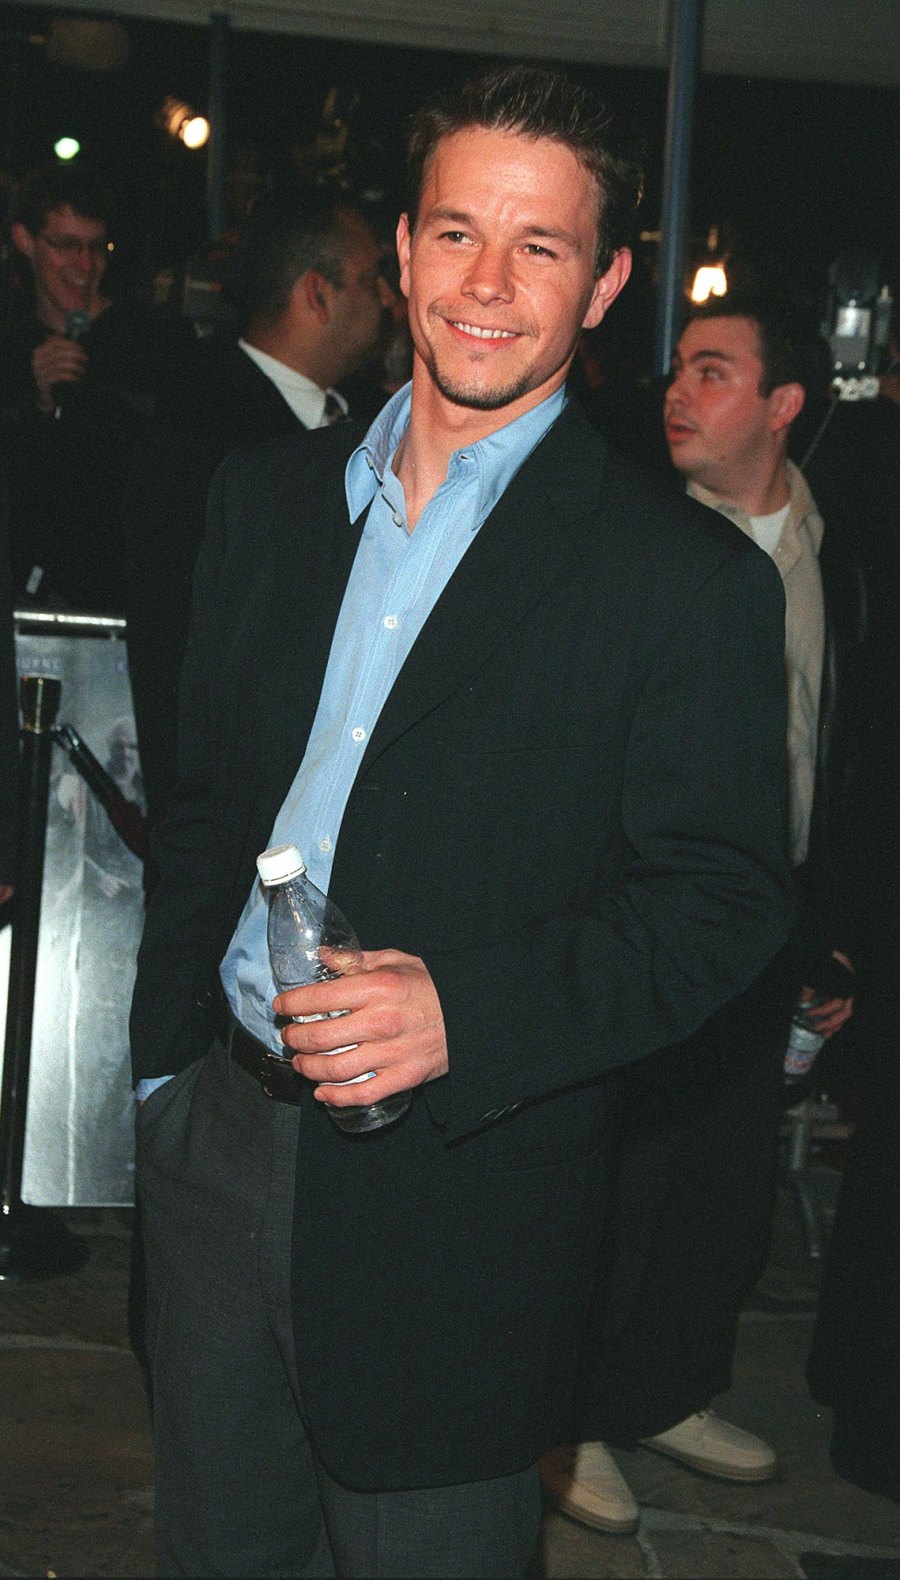 TK Wild Photos From The Matrix Premiere in 1999 489 Mark Wahlberg